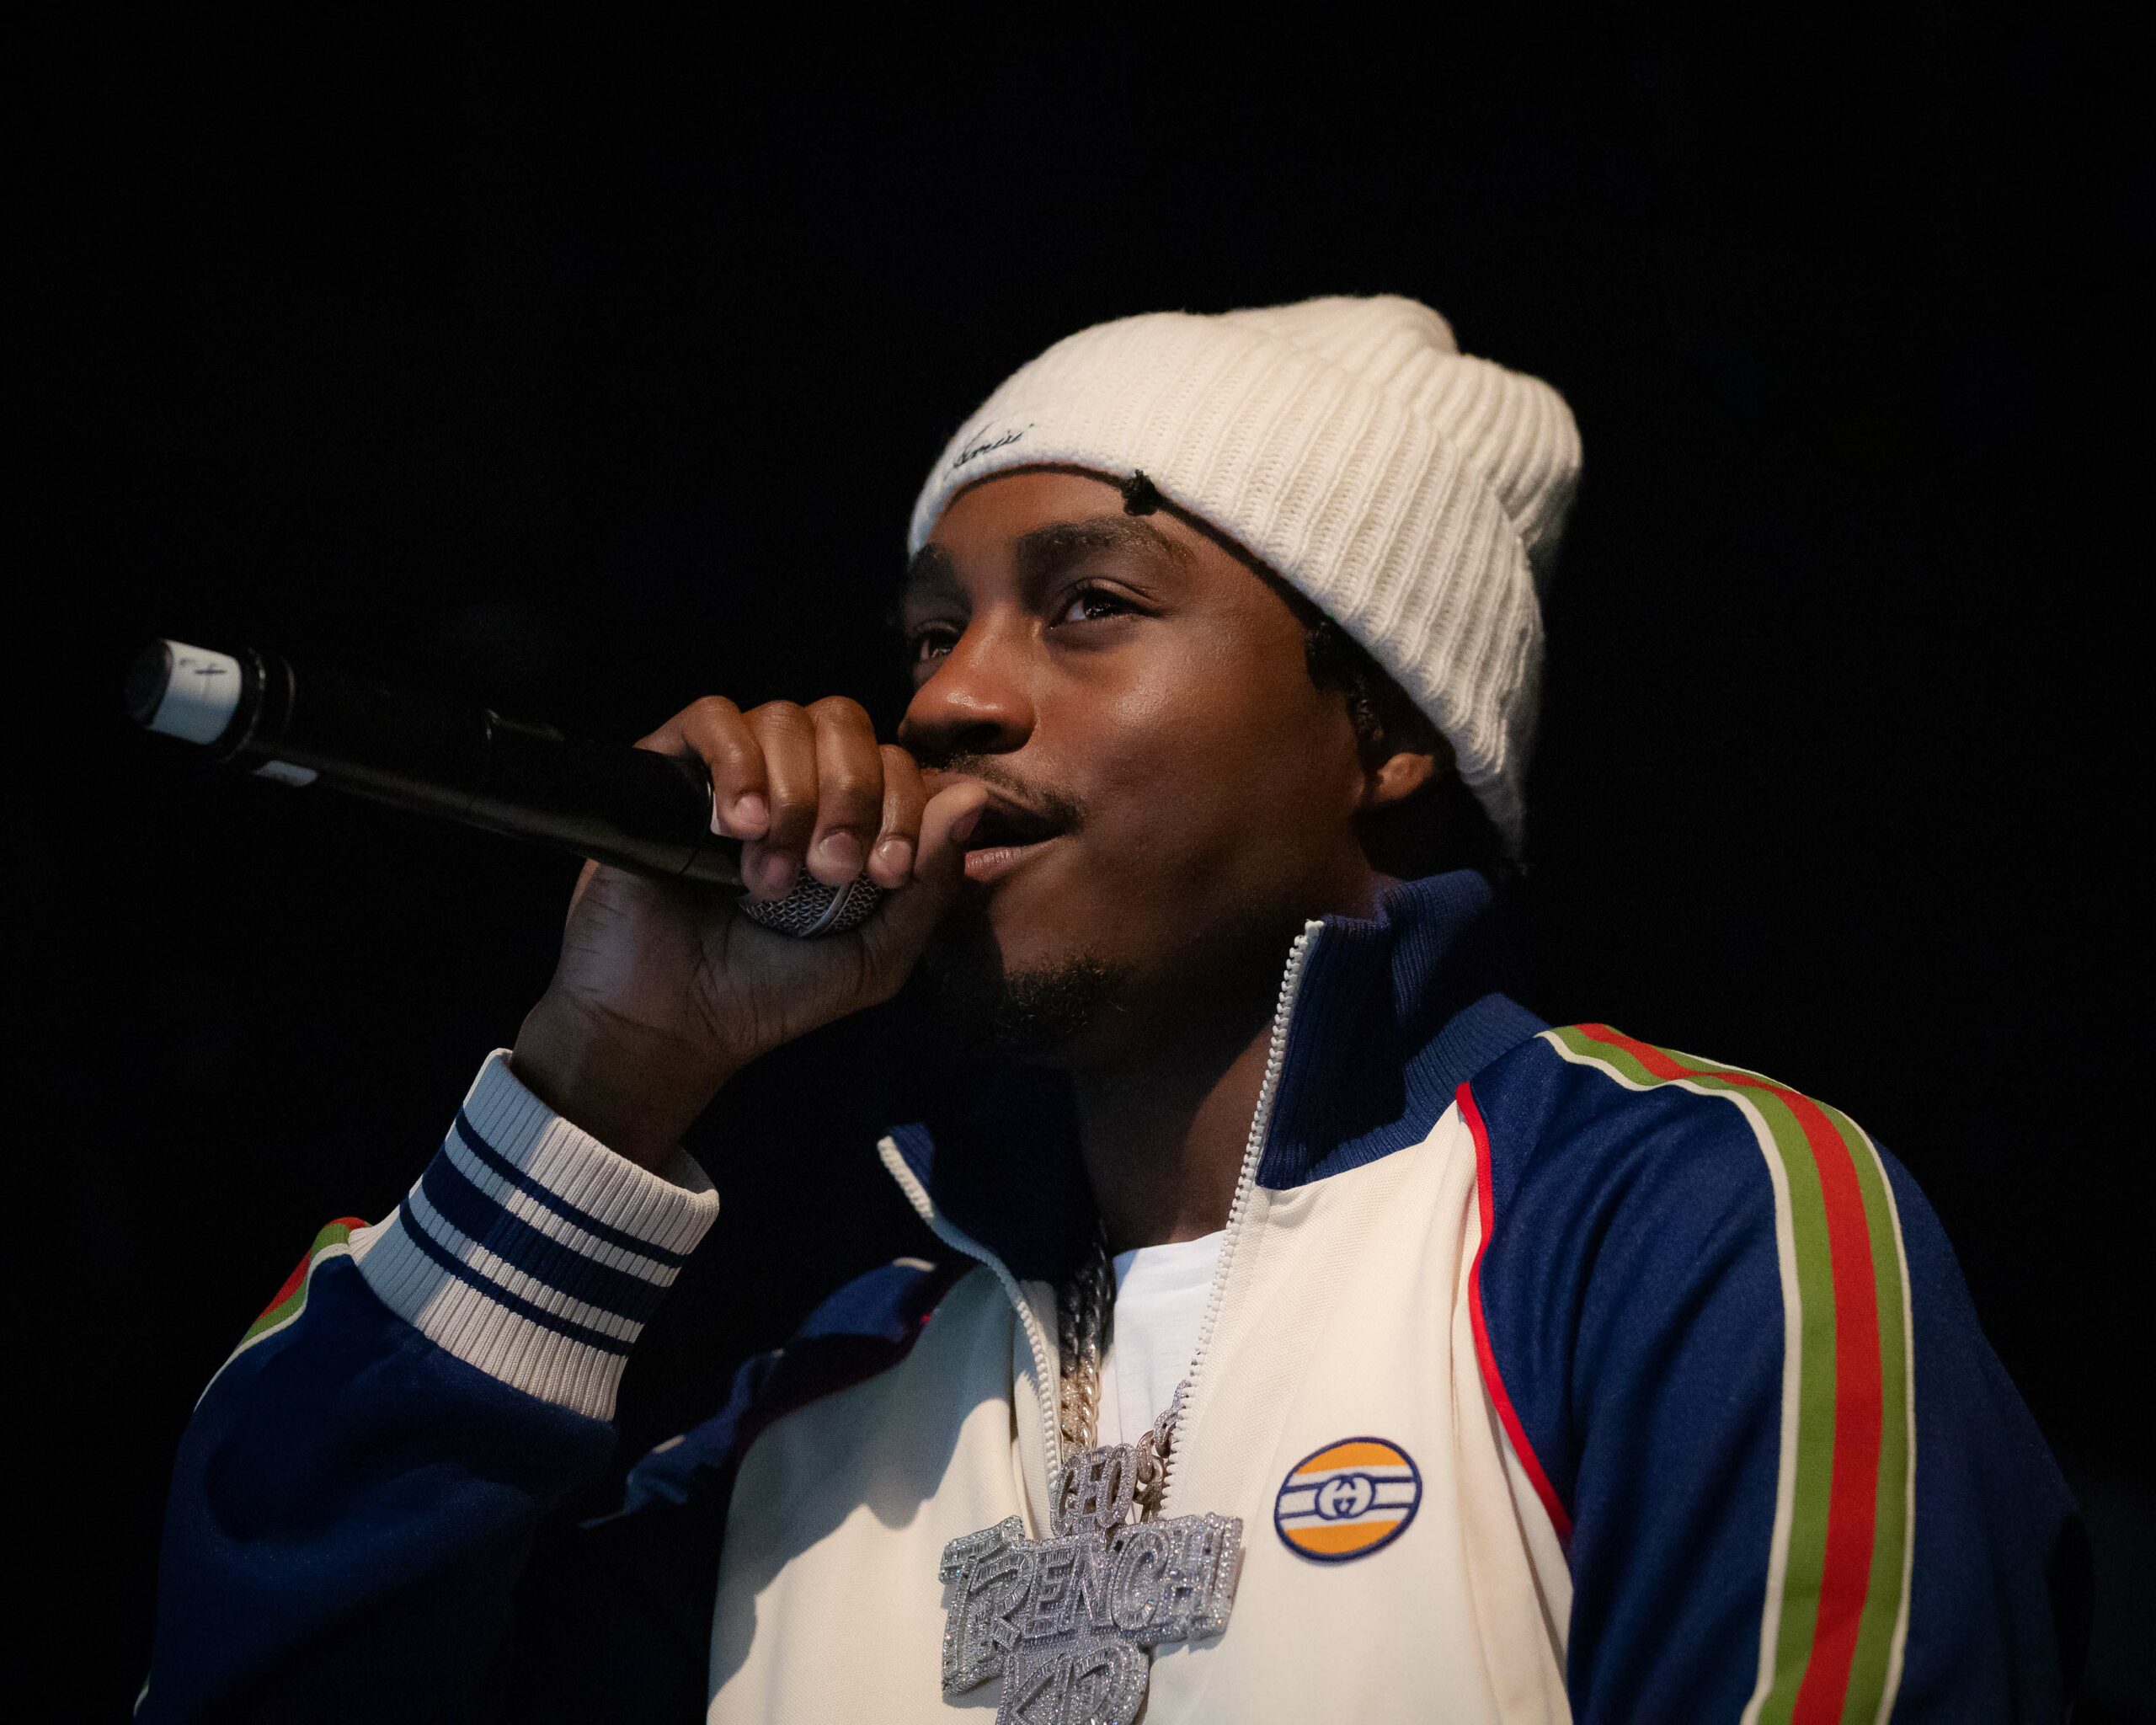 Download Rapper Lil Tjay on stage during a live performance